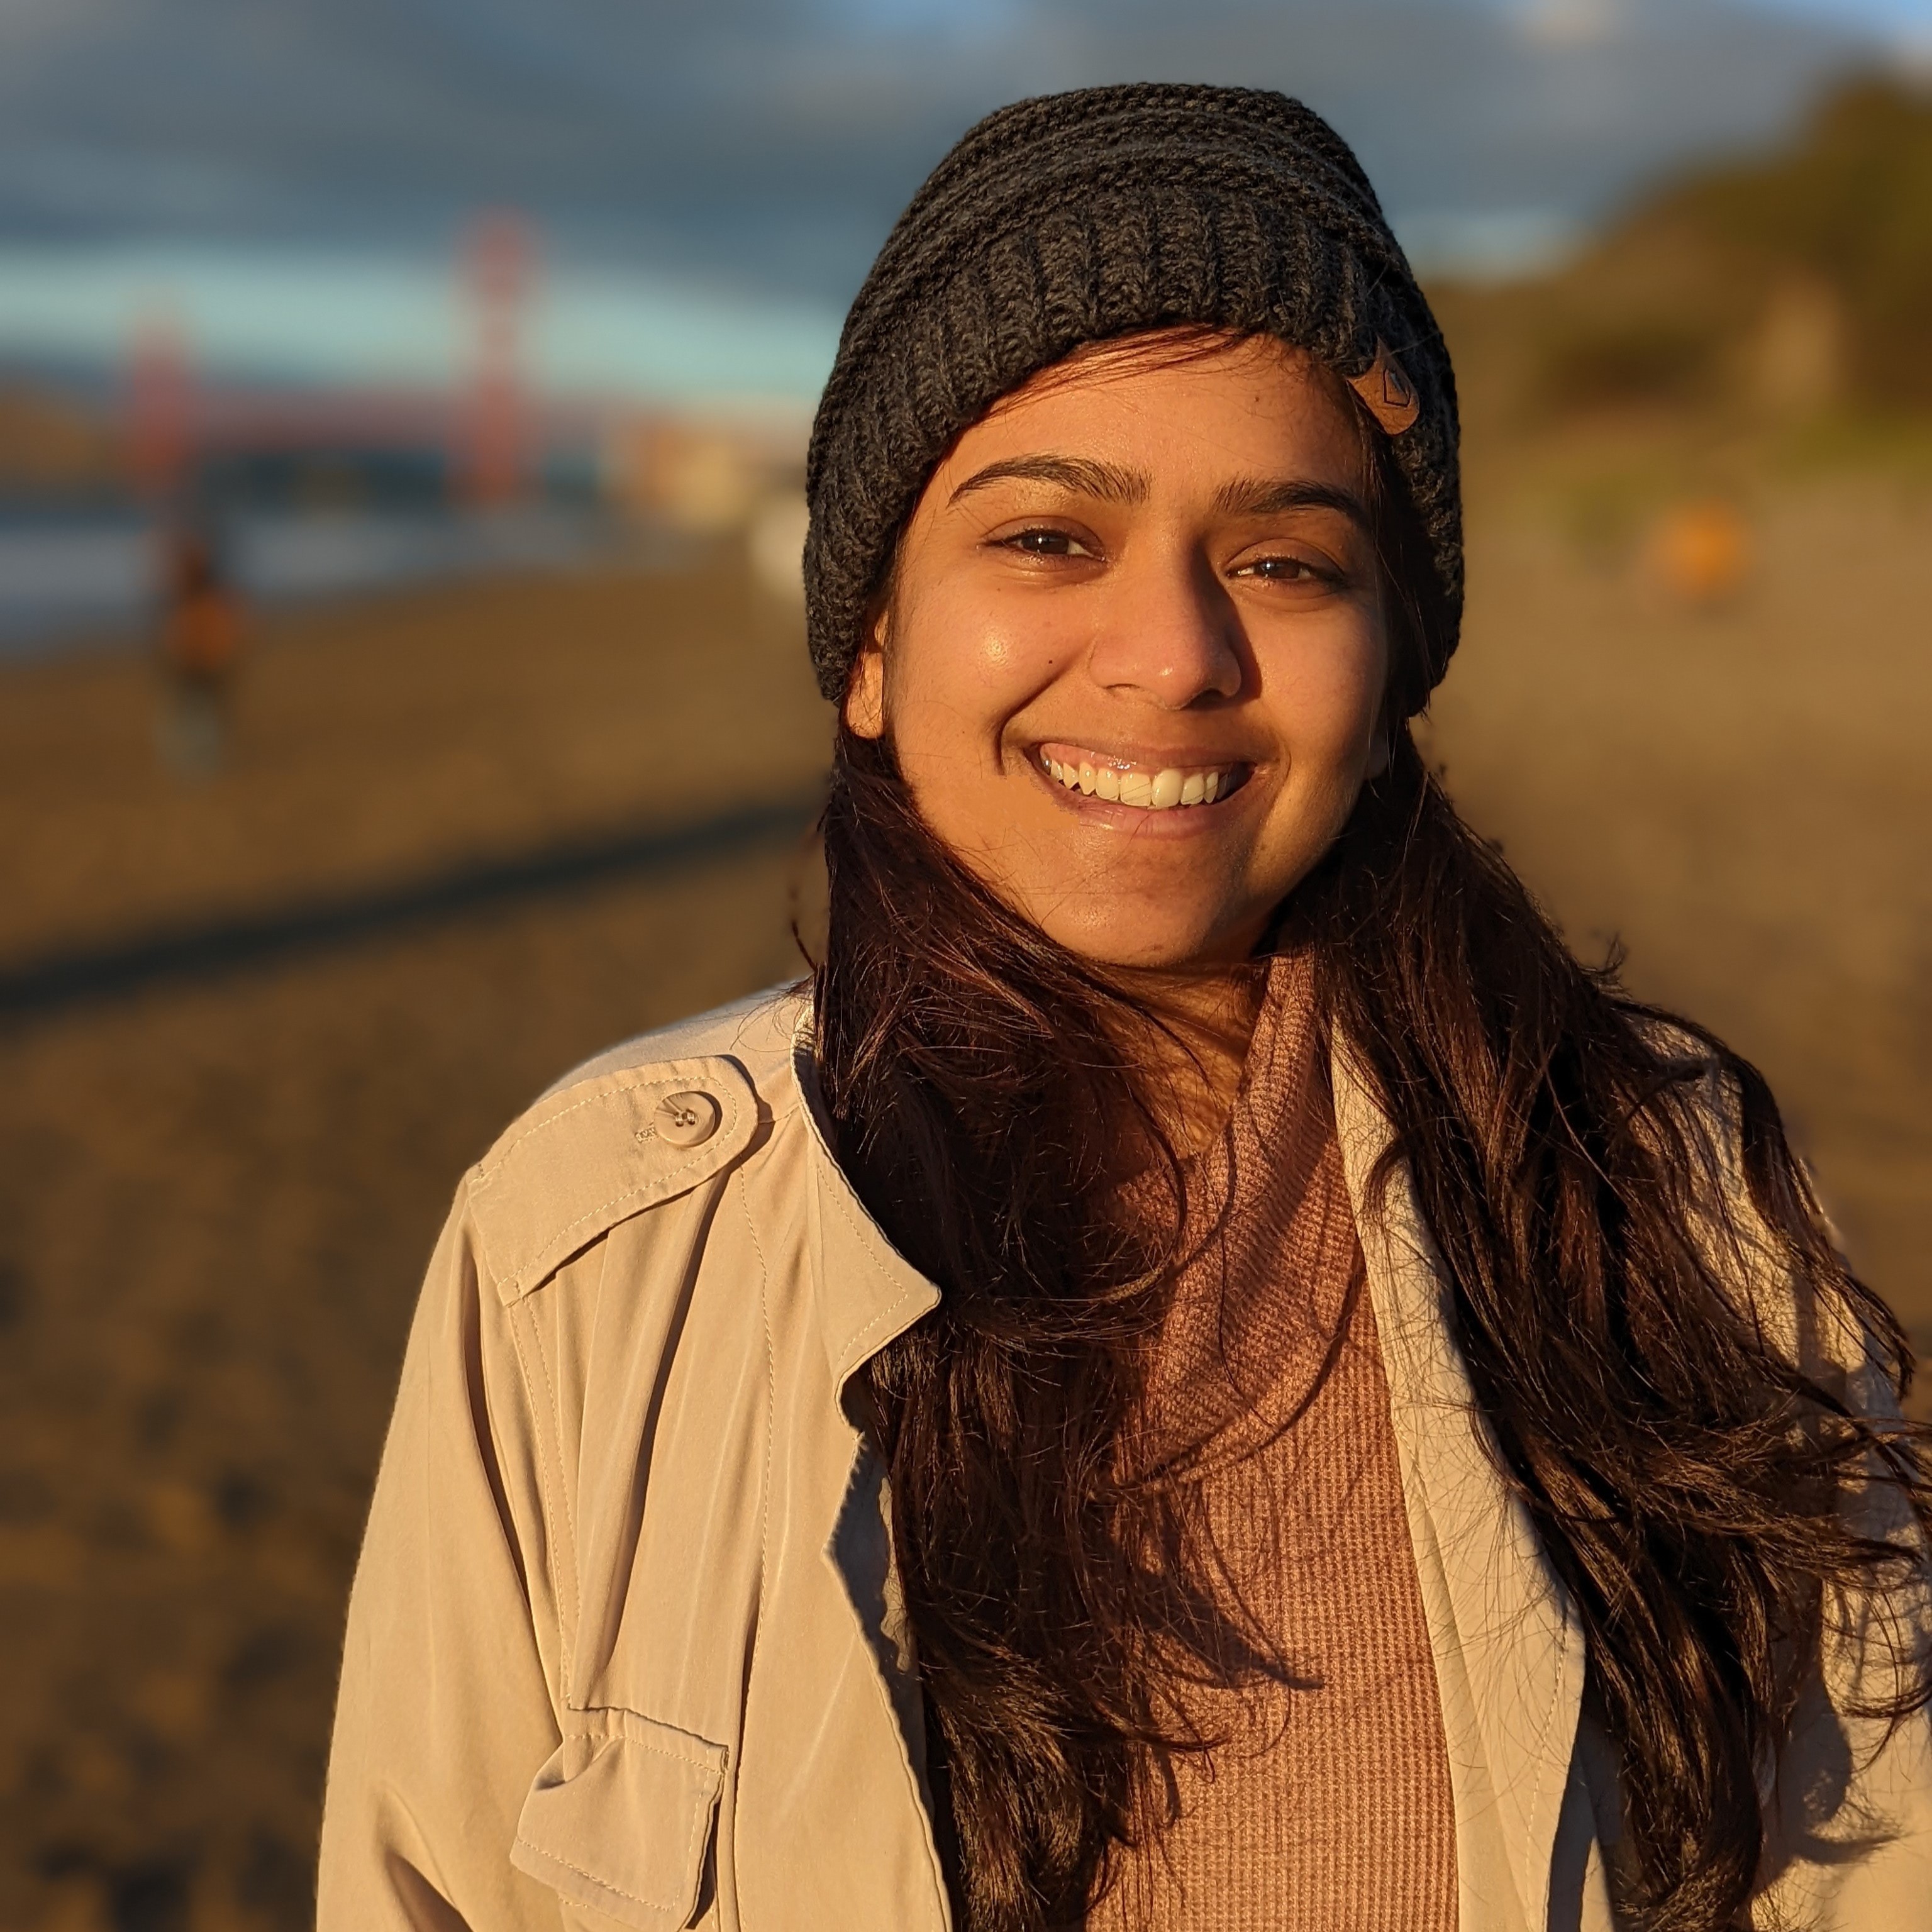 Headshot of Yeshashree with long brown hair, wearing a beanie and a coat, smiling